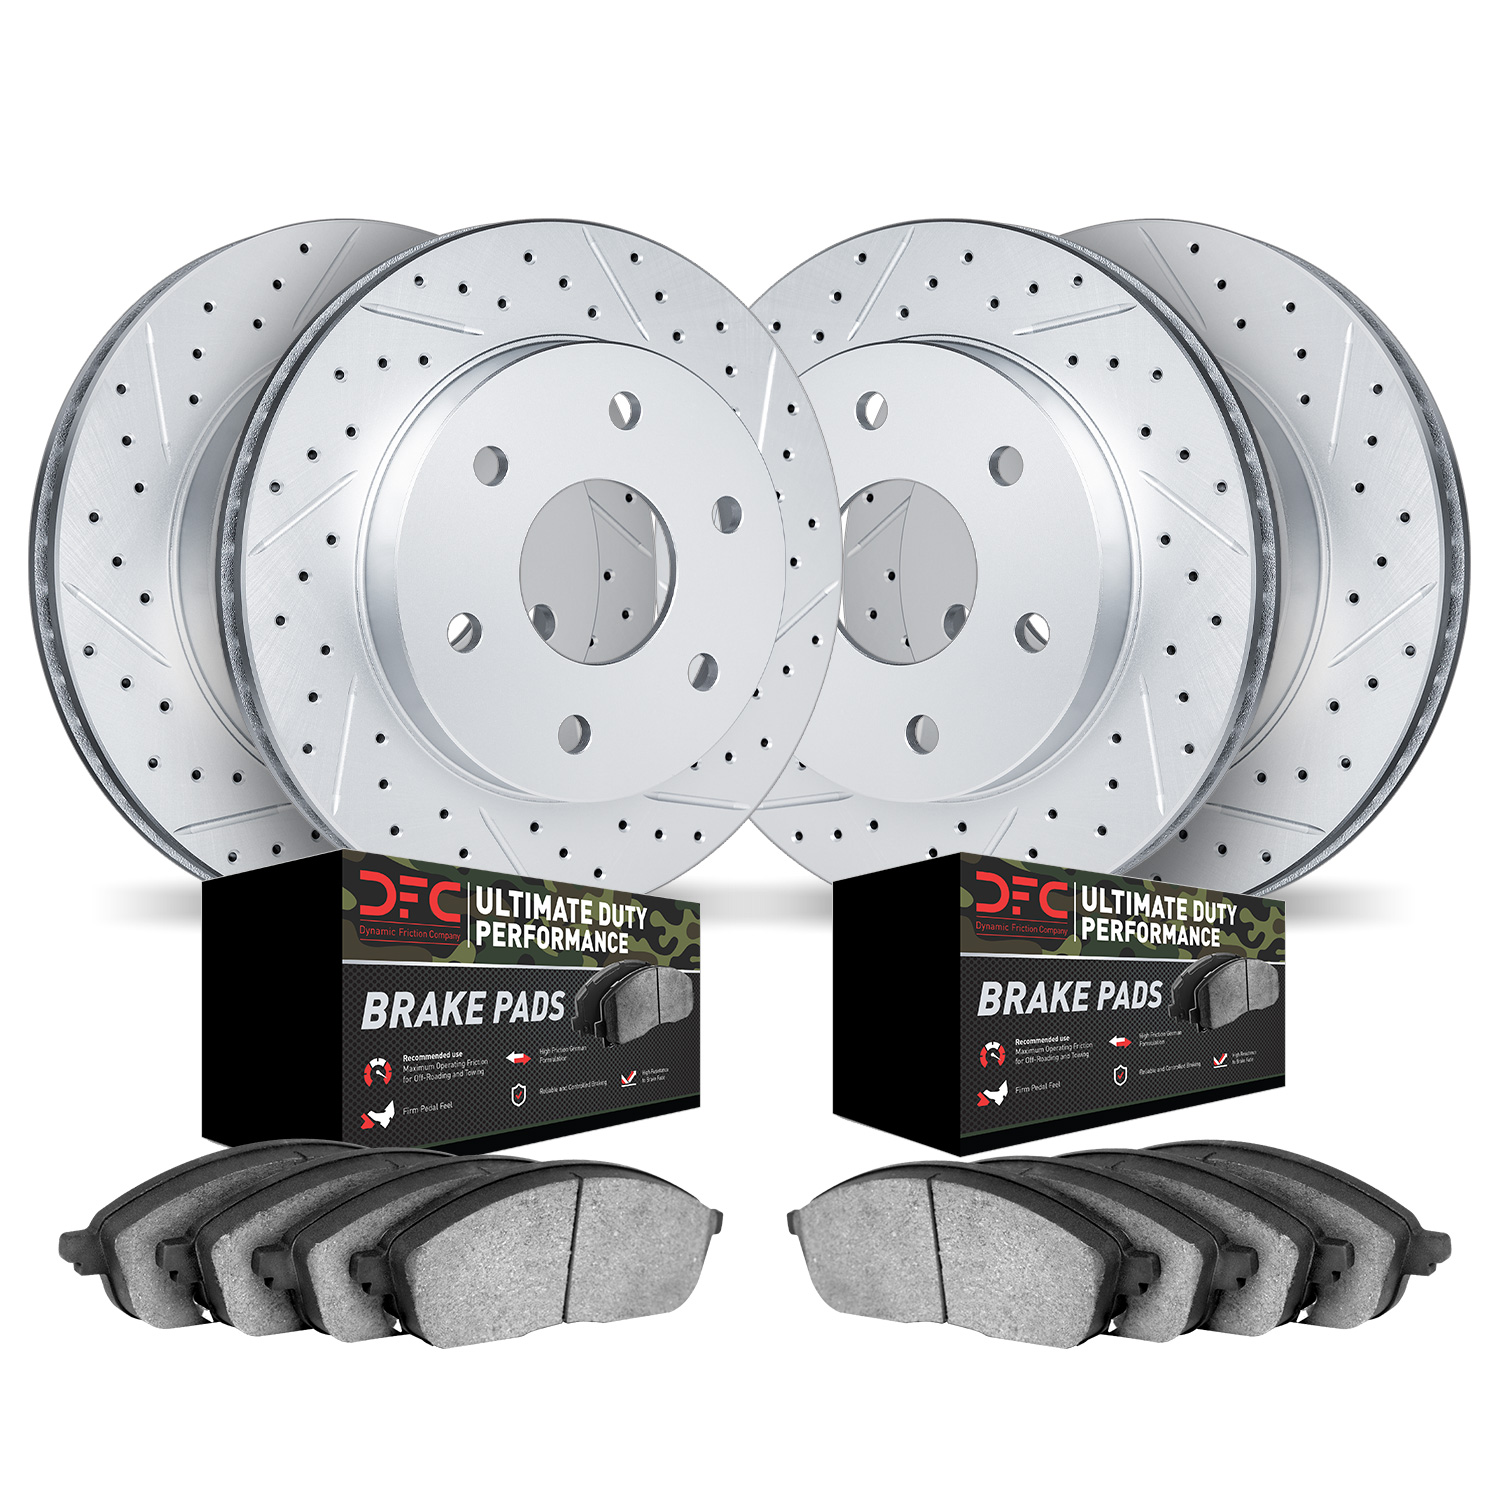 2404-76003 Geoperformance Drilled/Slotted Brake Rotors with Ultimate-Duty Brake Pads Kit, 2003-2009 Lexus/Toyota/Scion, Position